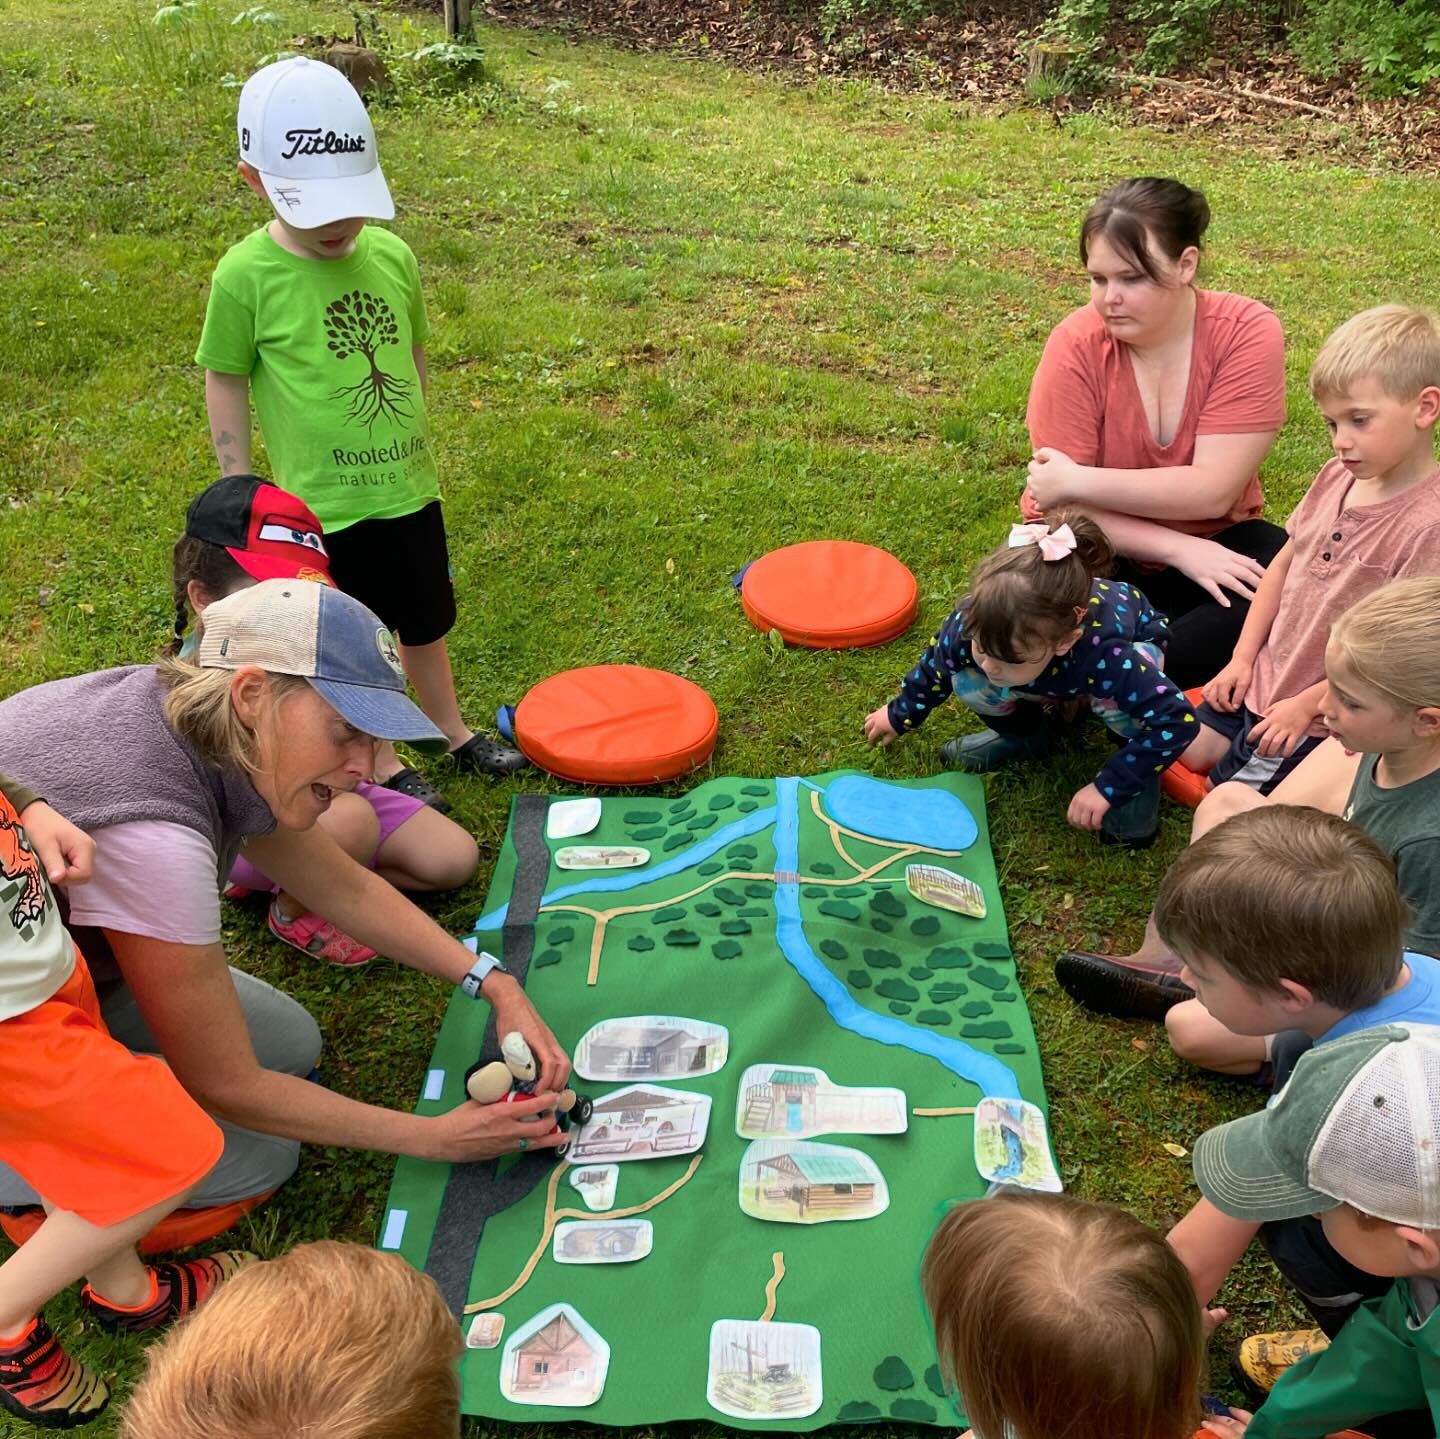 Today our nature preschoolers used a map to visualize our travels for the day! Our very own Ms. Alex created a detailed map of camp and many of the features and locations that we visit while at school, and it showed us a path to the nature play space